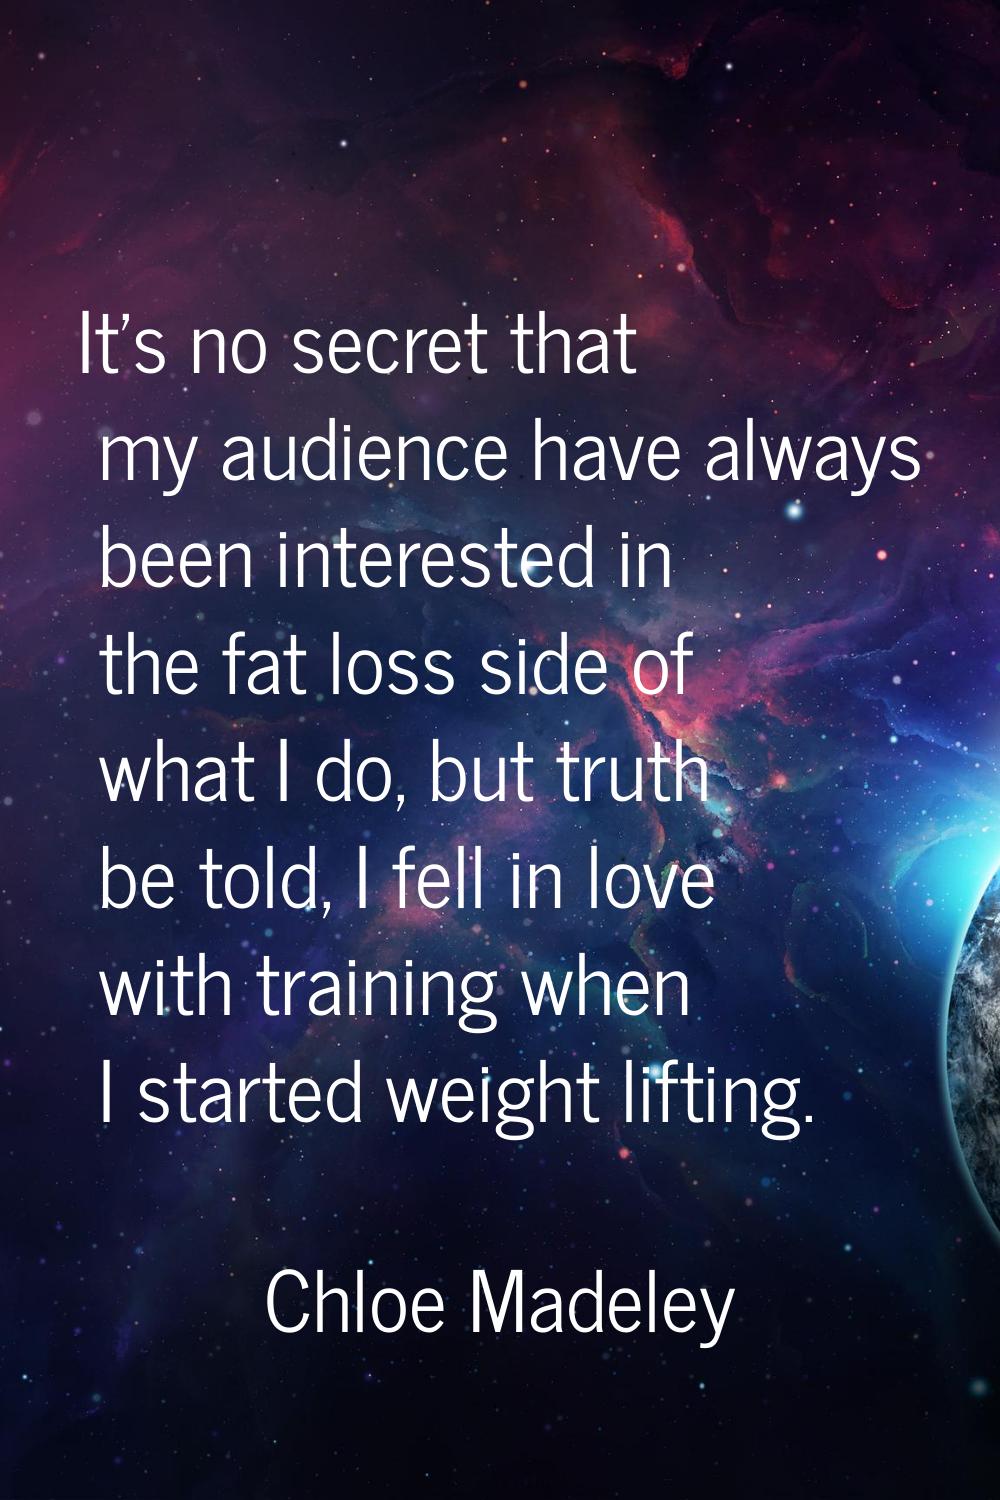 It's no secret that my audience have always been interested in the fat loss side of what I do, but 